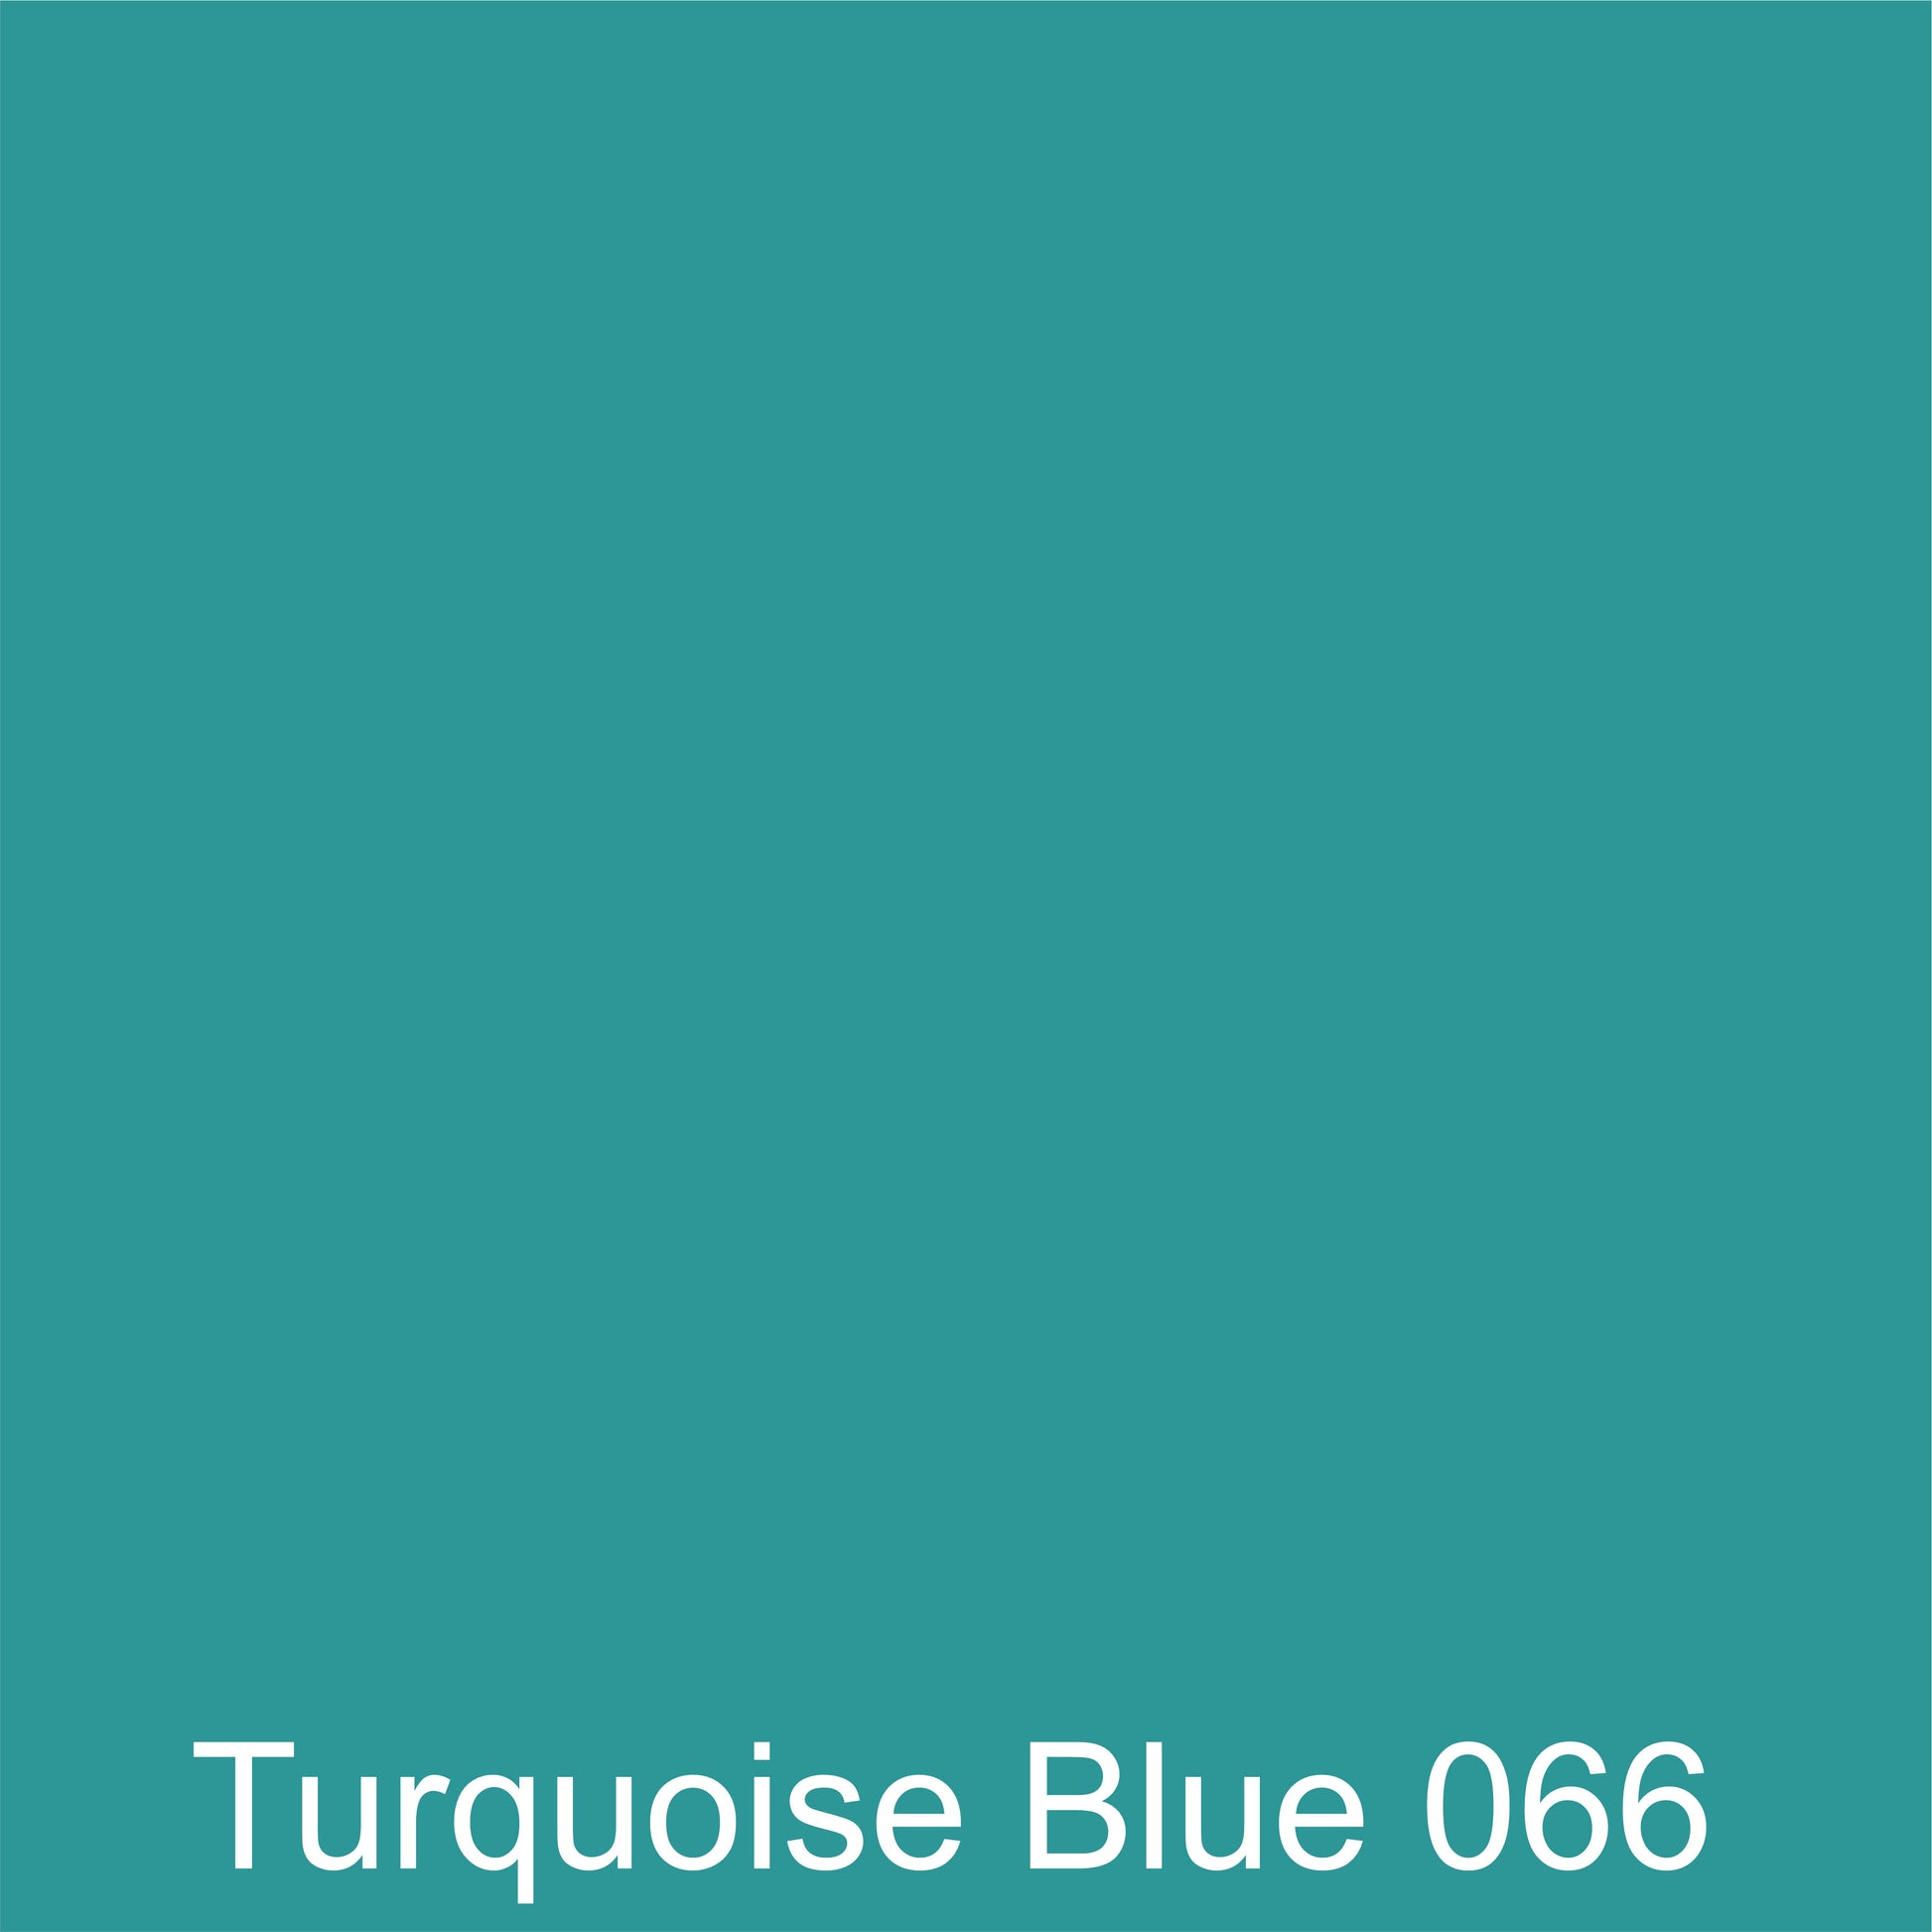 Oracal 651 Gloss :- Turquoise Blue - 066 – G.A.B Vinyls